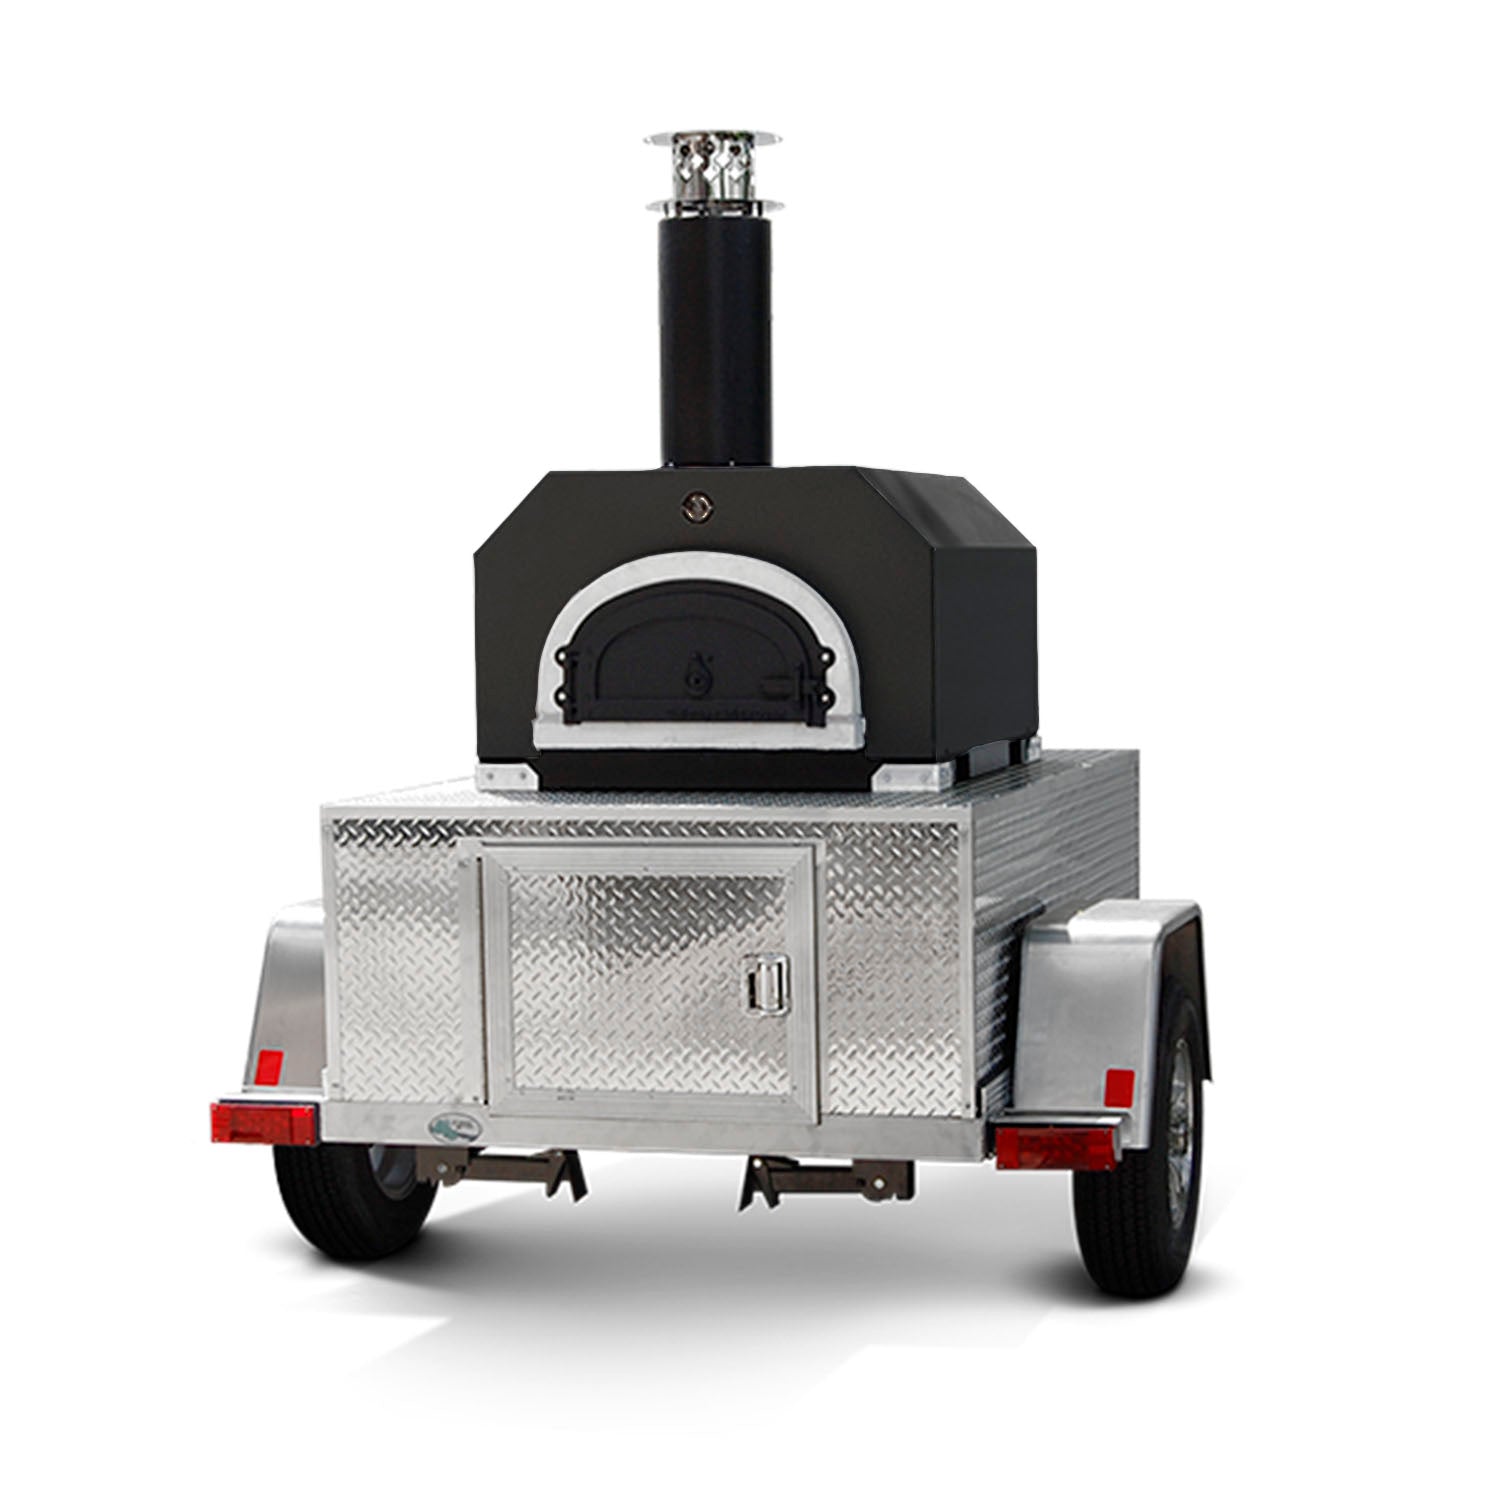 Chicago Brick Oven 750 Tailgater | Wood Fired Pizza Oven | Get Yours On Order Now!